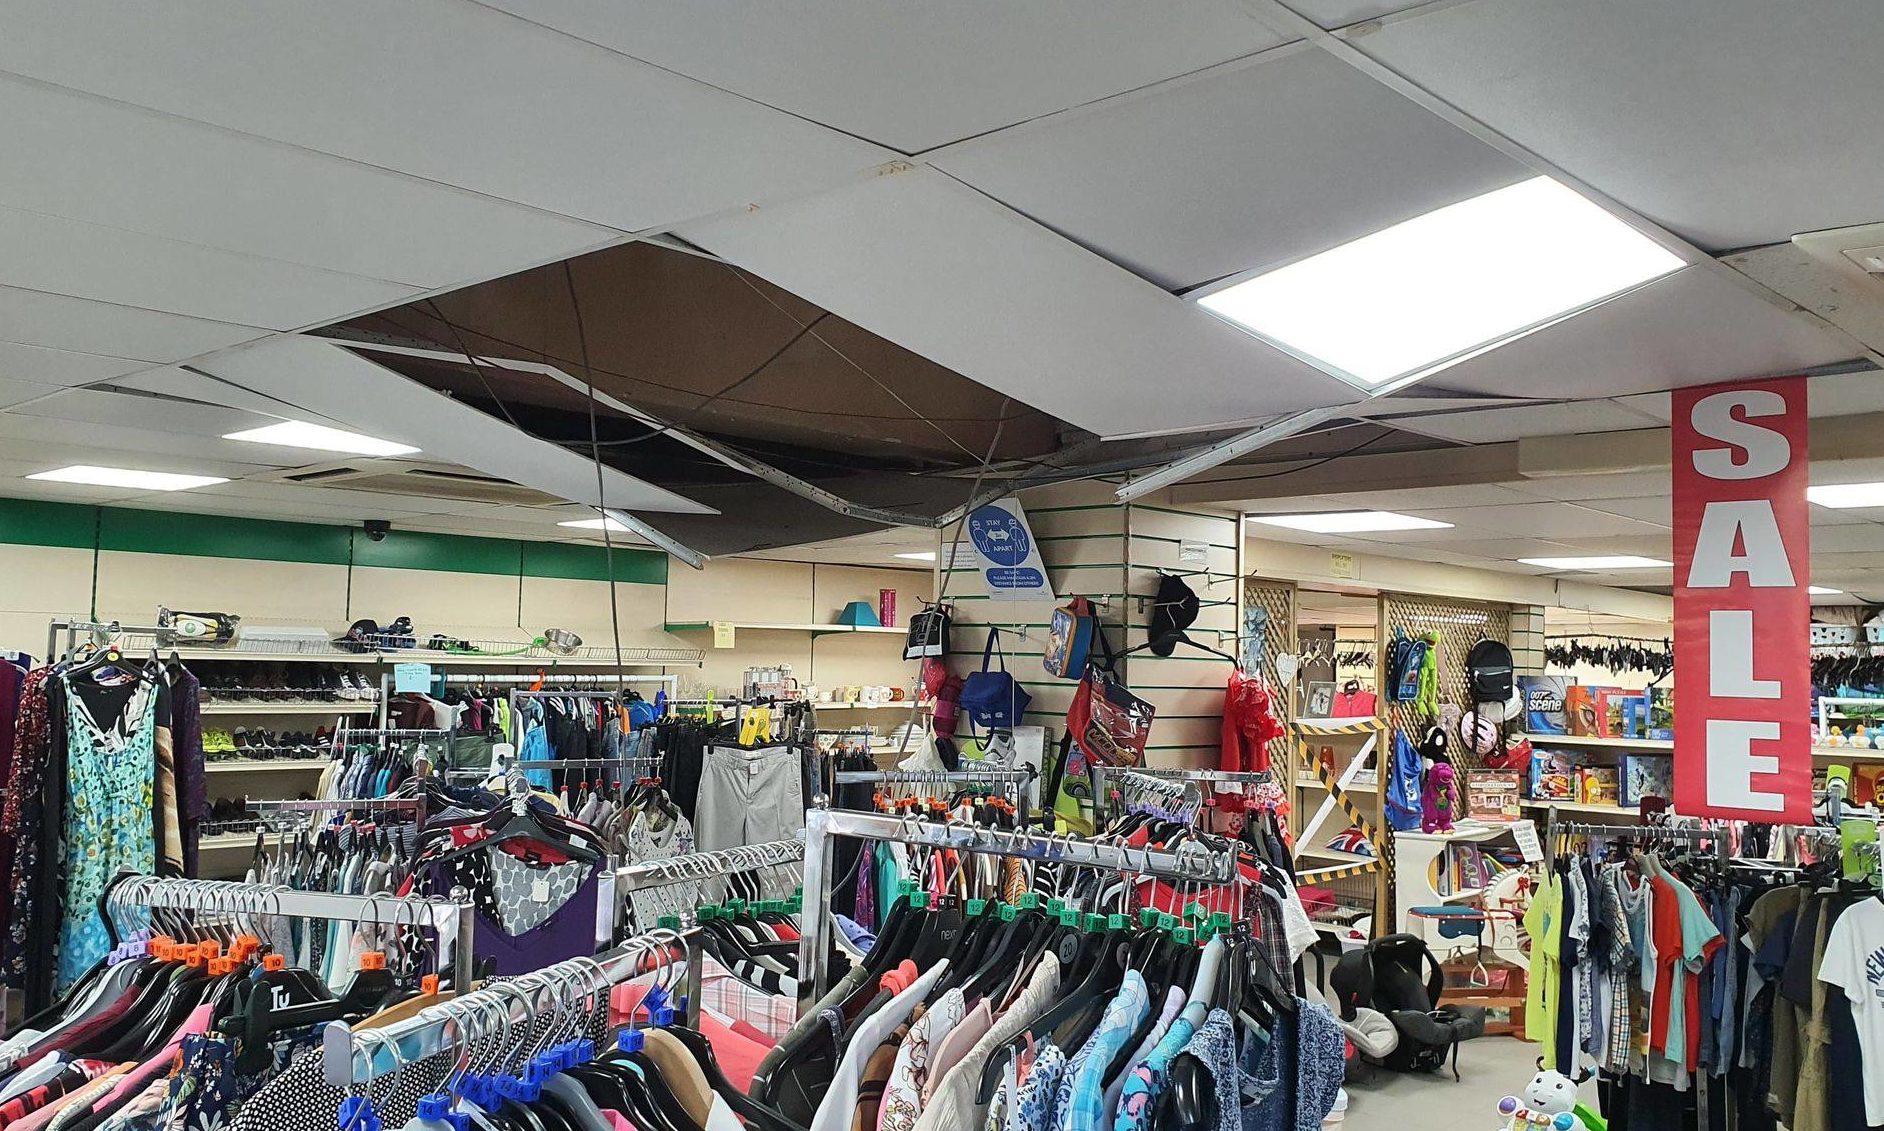 The thieves entered the premises through the roof, causing the ceiling to collapse.